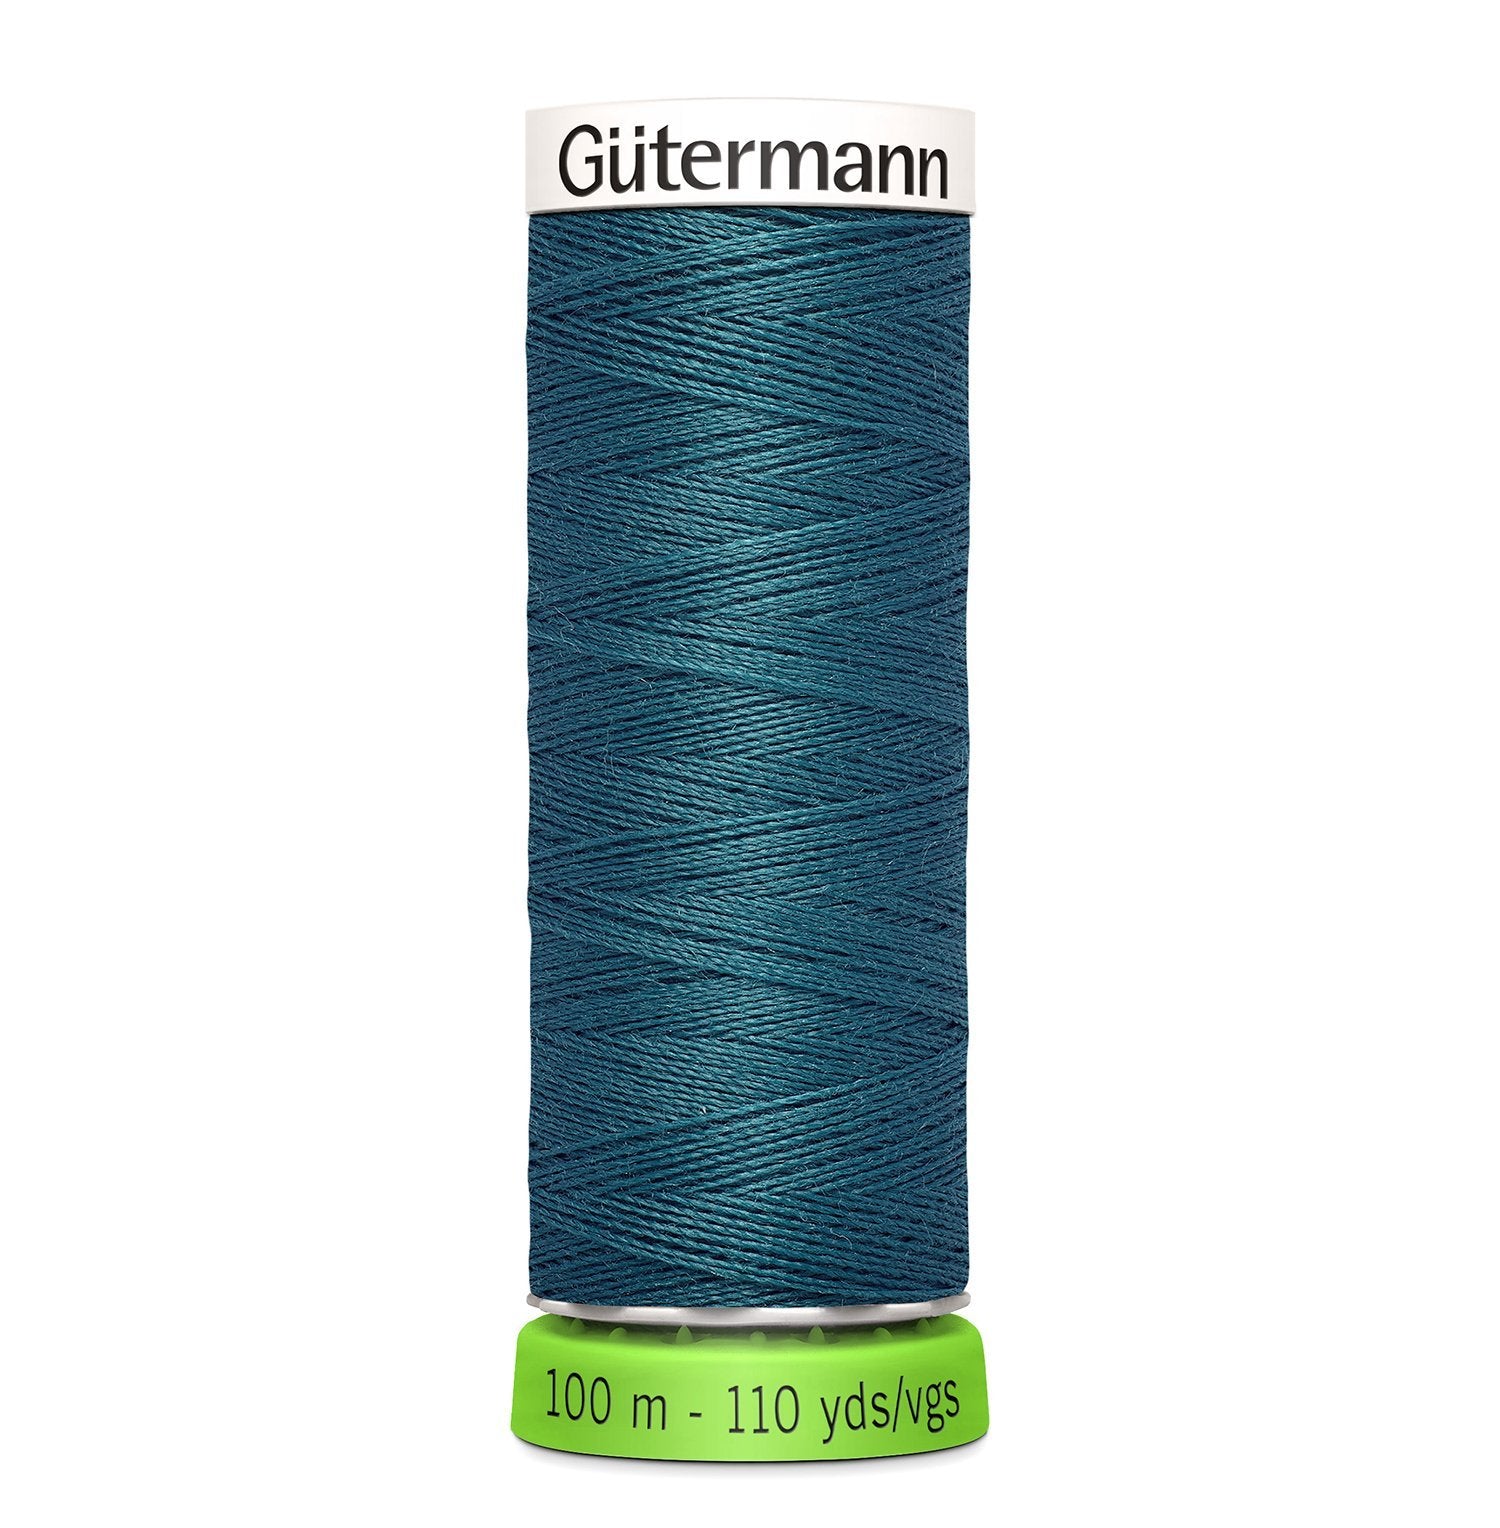 Gutermann Recycled Thread 100m, Colour 223 from Jaycotts Sewing Supplies